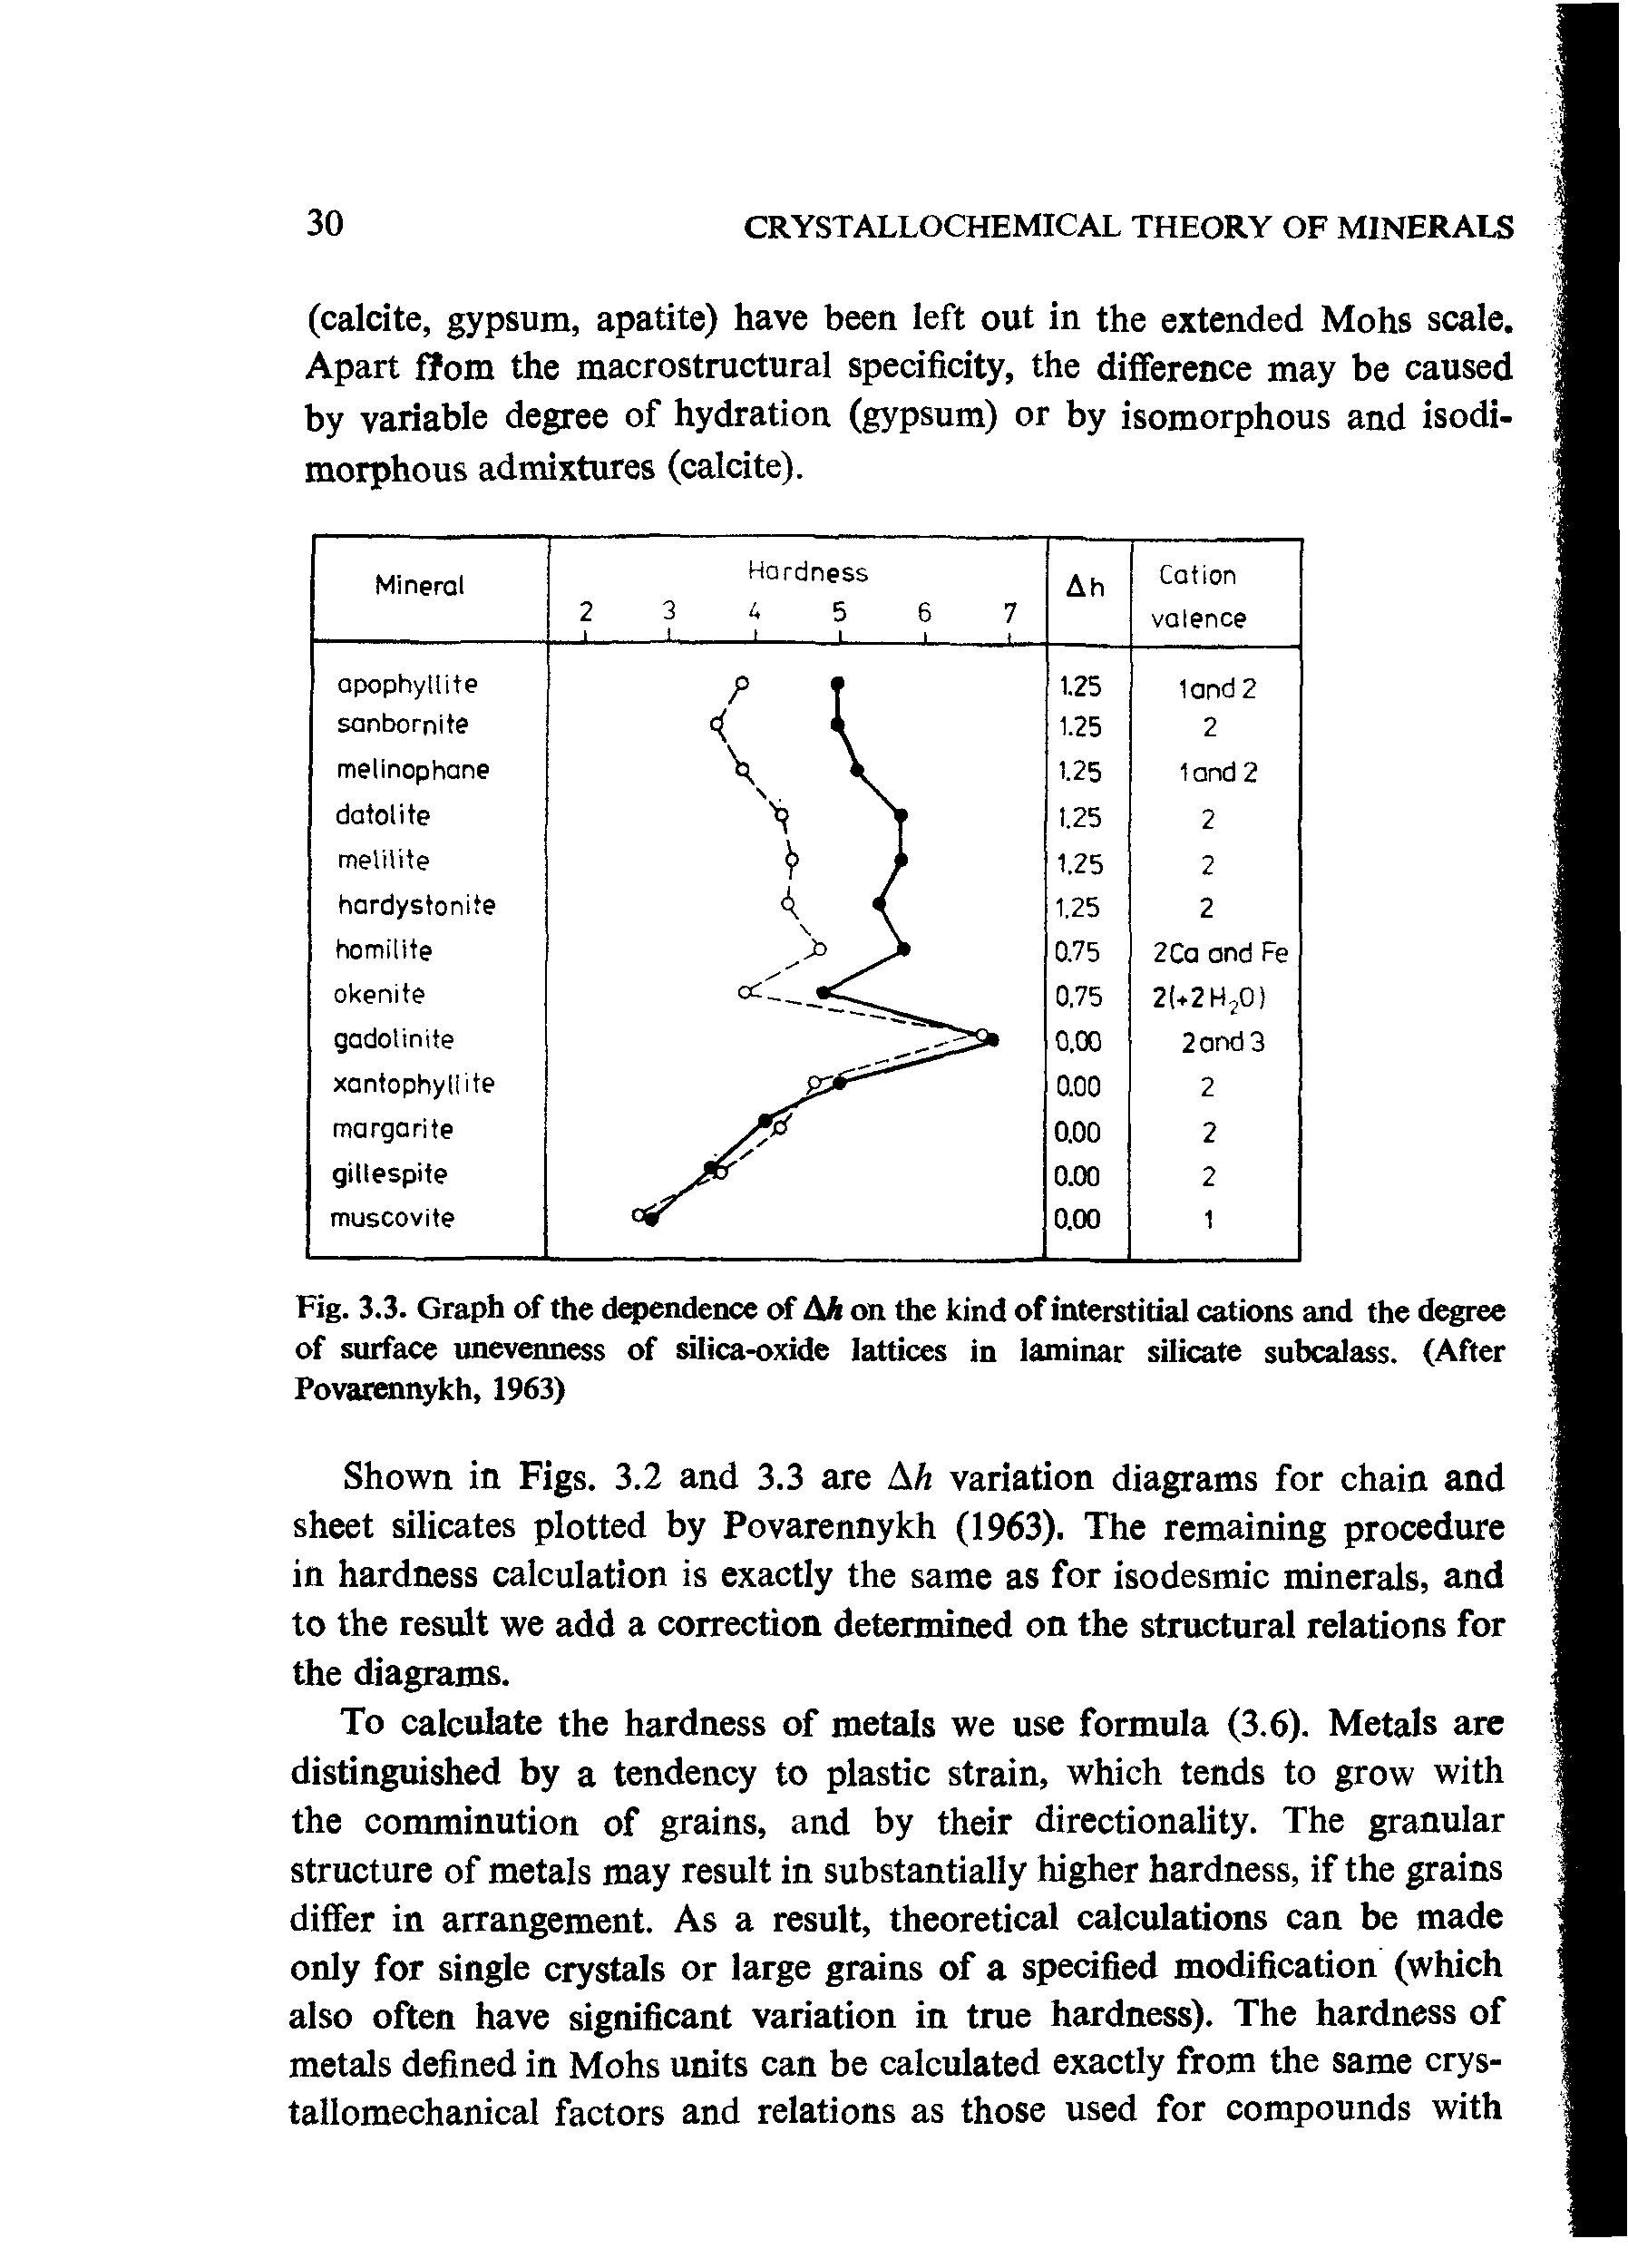 Fig. 3.3. Graph of the dependence of Ah on the kind of interstitial cations and the degree of surface unevenness of silica-oxide lattices in laminar silicate subcalass. (After Povarennykh, 1963)...